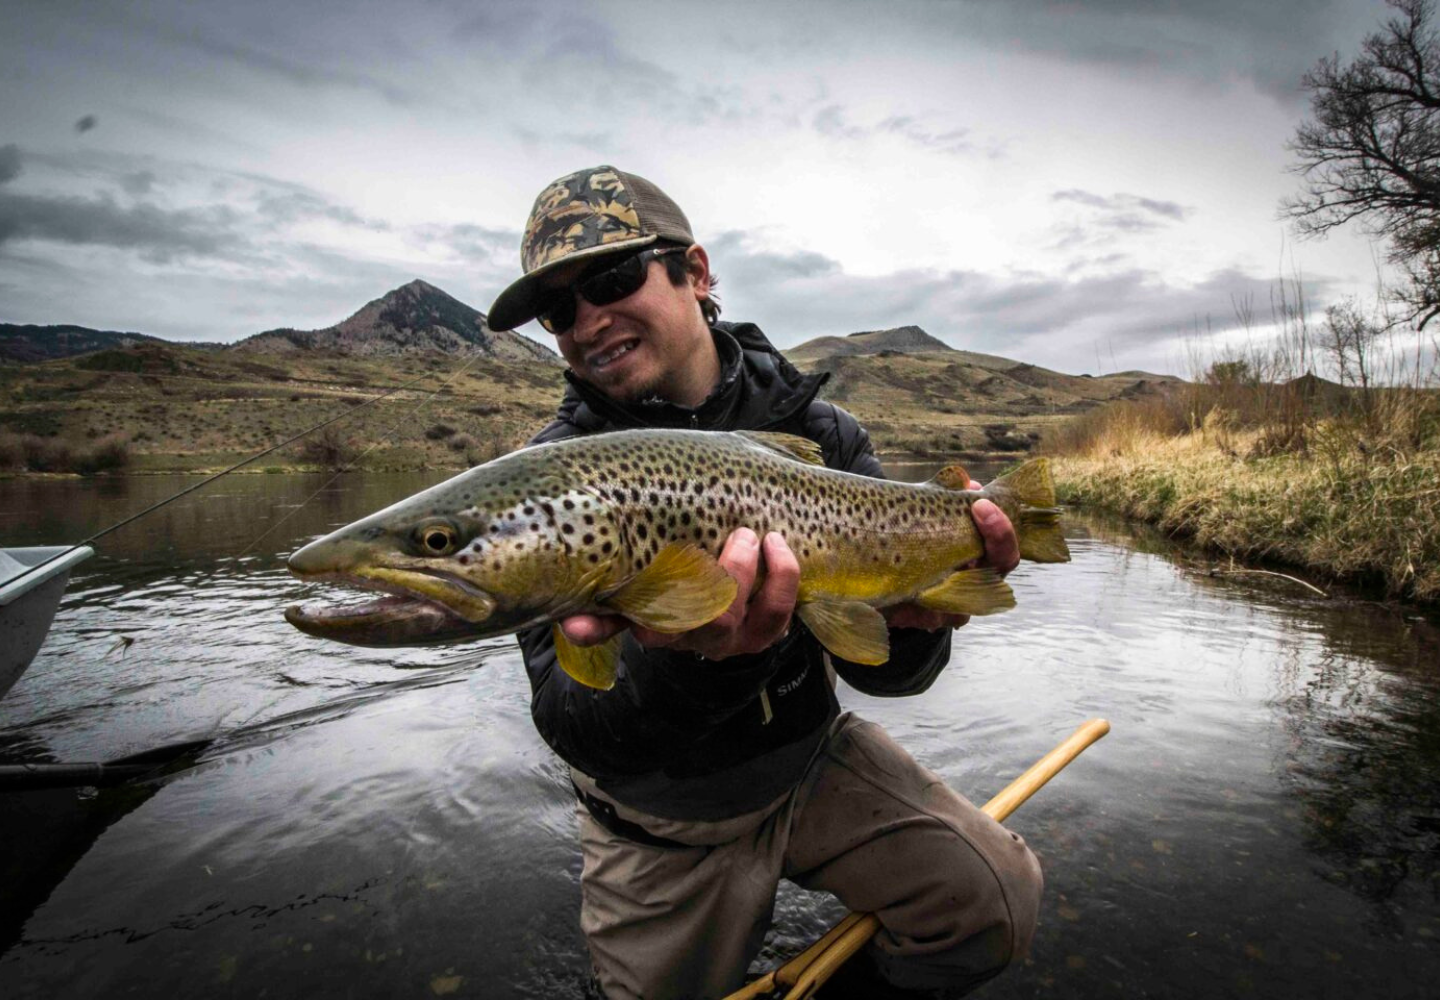 fly fisherman holds a large brown trout caught on the Missouri River near Craig, Montana